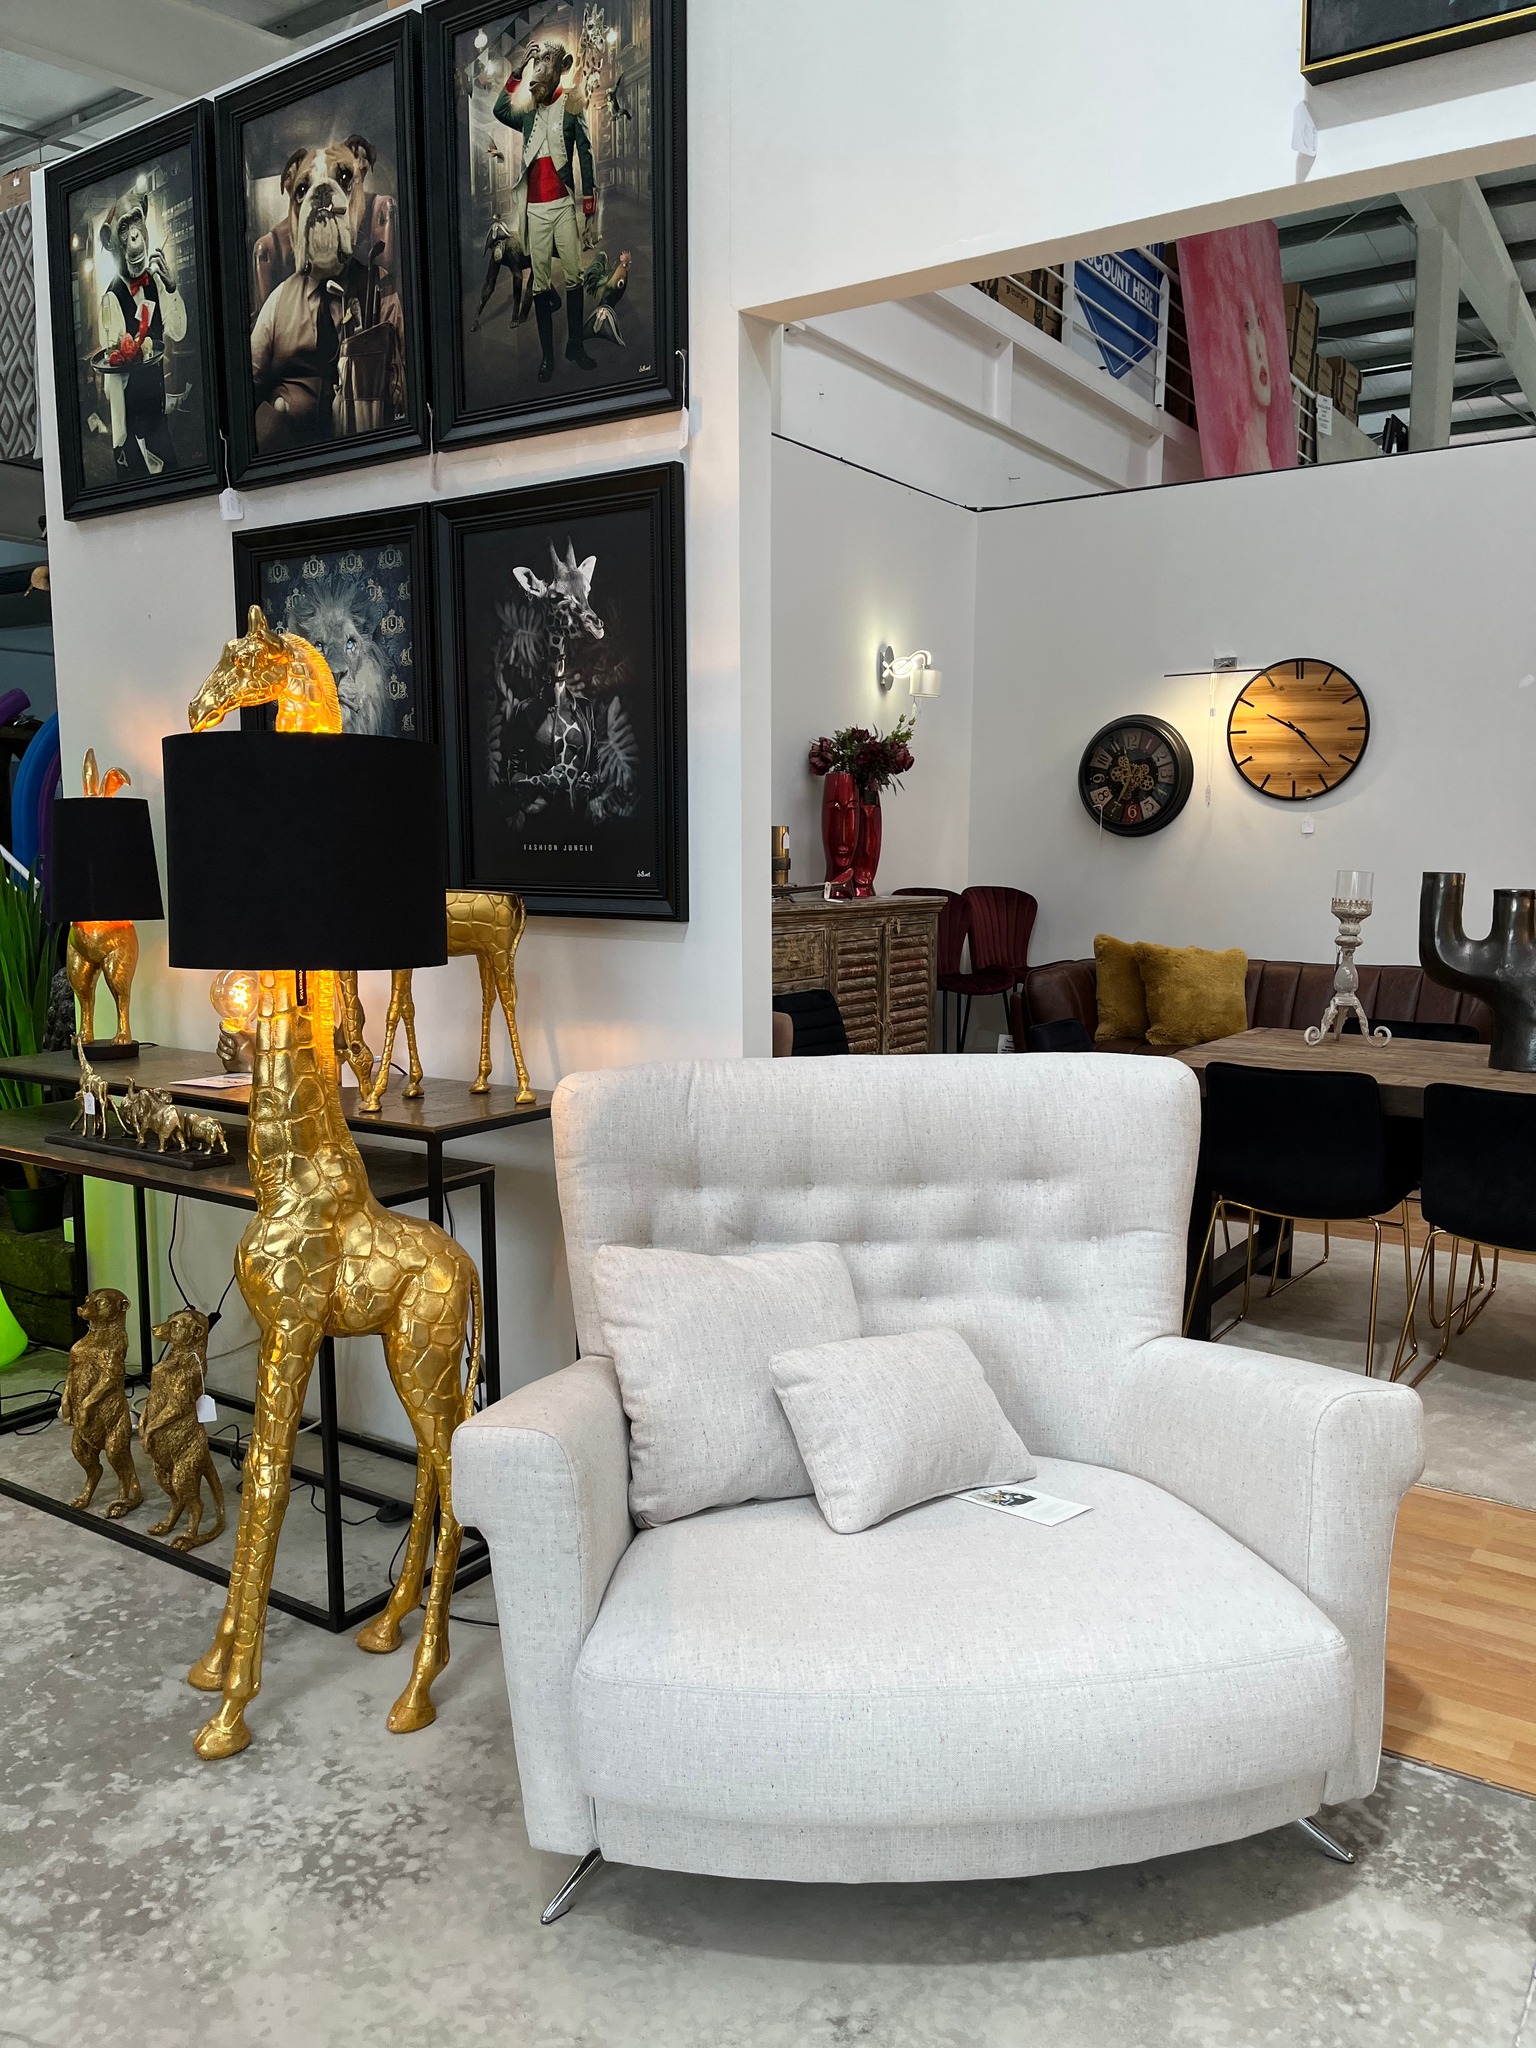 Our showroom is full of beautiful, unique pieces for your home. Visit us for inspiration!

 » Outdoor Furniture Fuengirola, Costa Del Sol, Spain